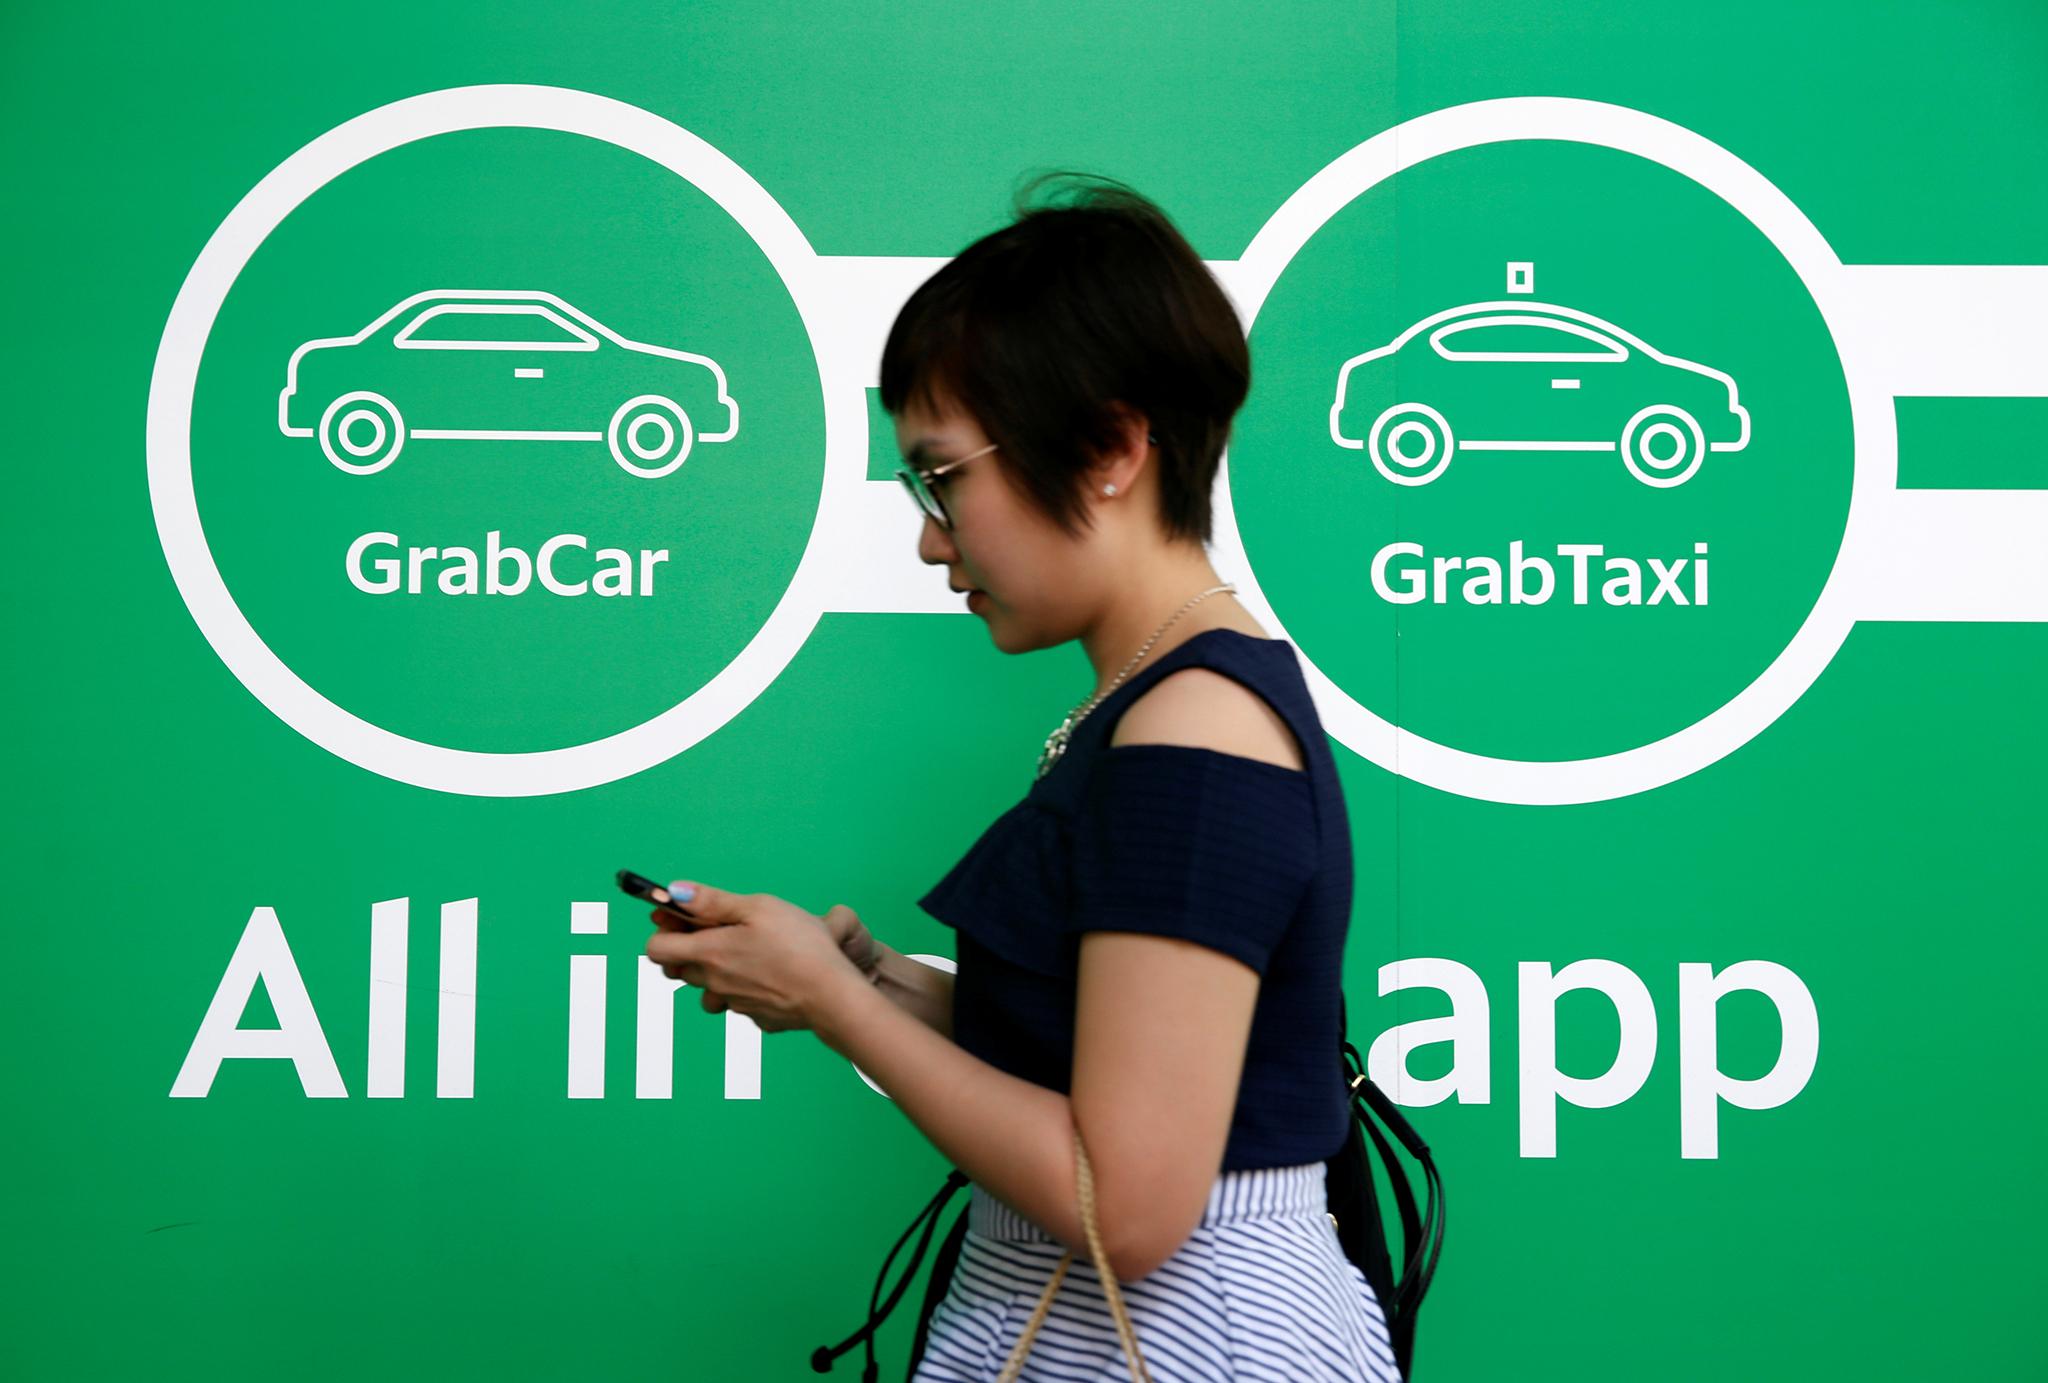 Grab is significally more popular than Uber in Singapore and other parts of south-east Asia